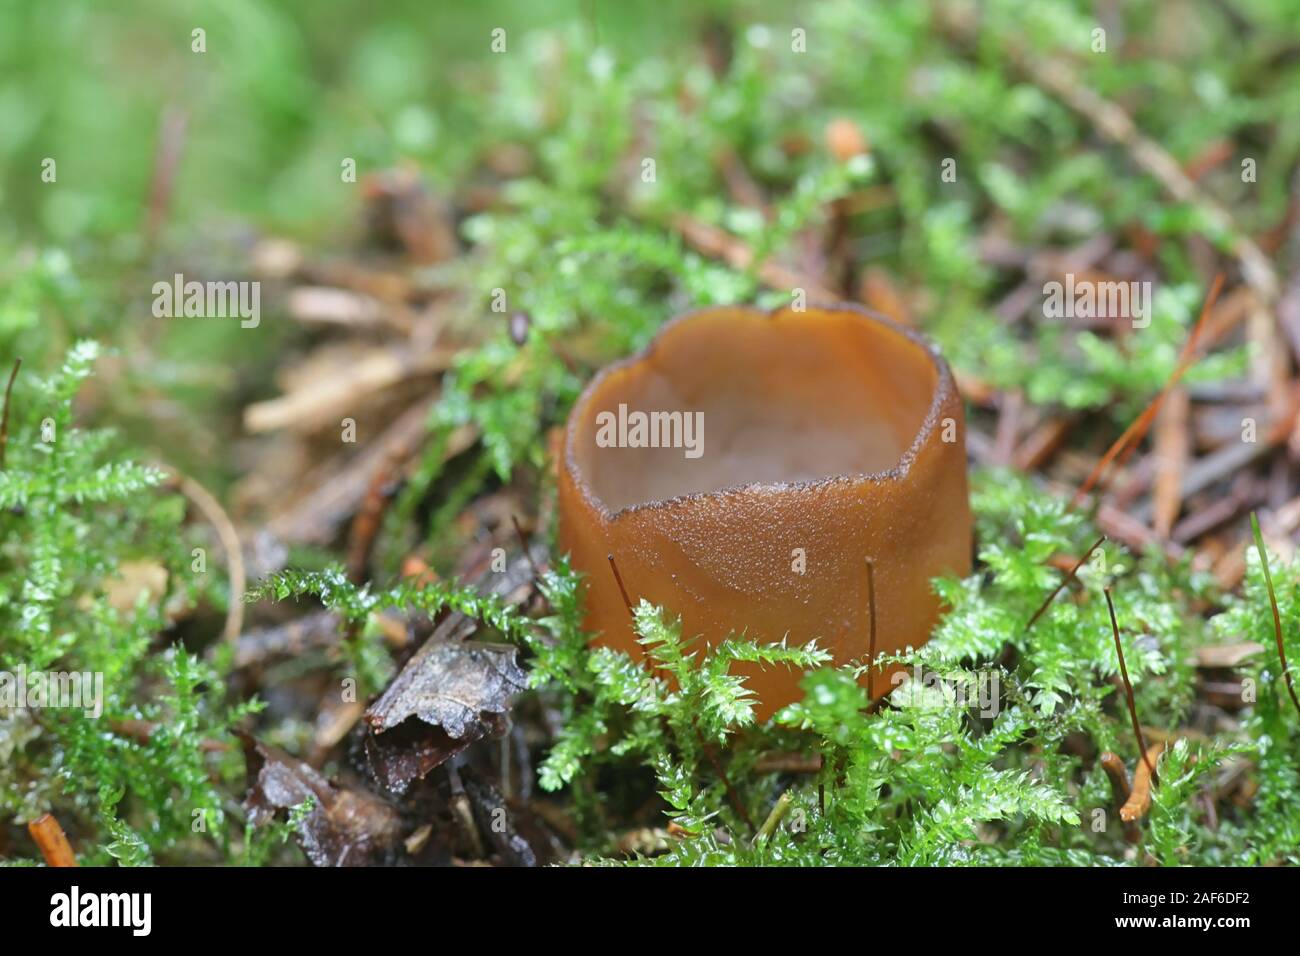 Humaria hemisphaerica, known as the hairy fairy cup, the brown-haired fairy cup or glazed cup, wild mushrooms from Finland Stock Photo